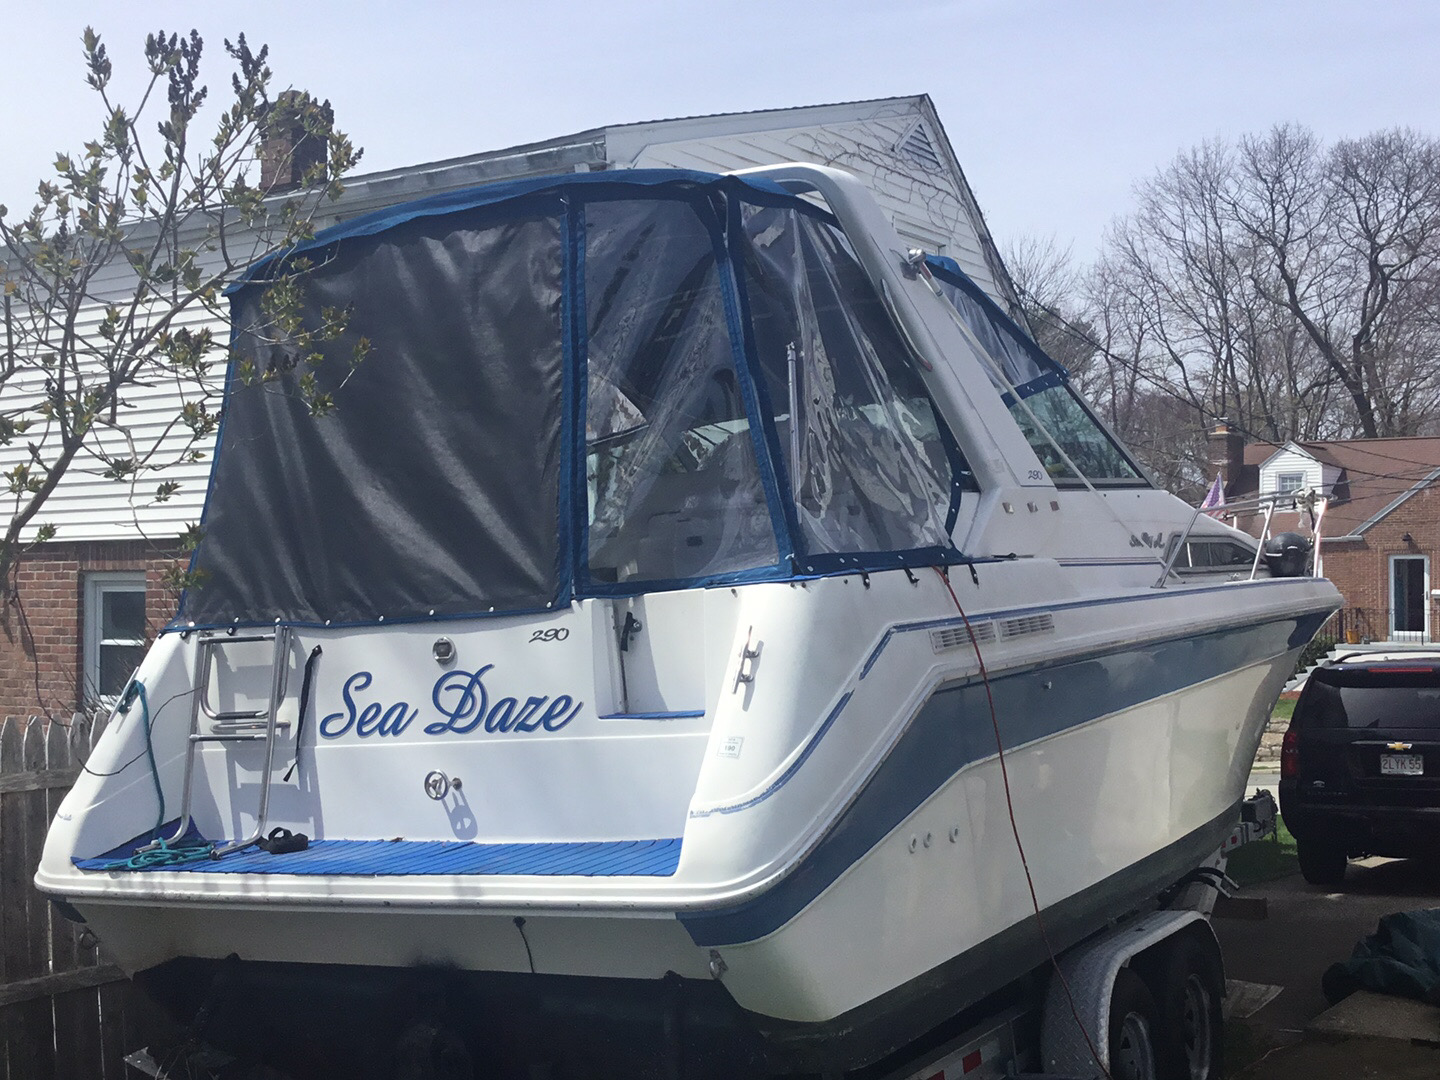 1993 30 foot Sea Ray Cabin CR Power boat for sale in New London, CT - image 3 